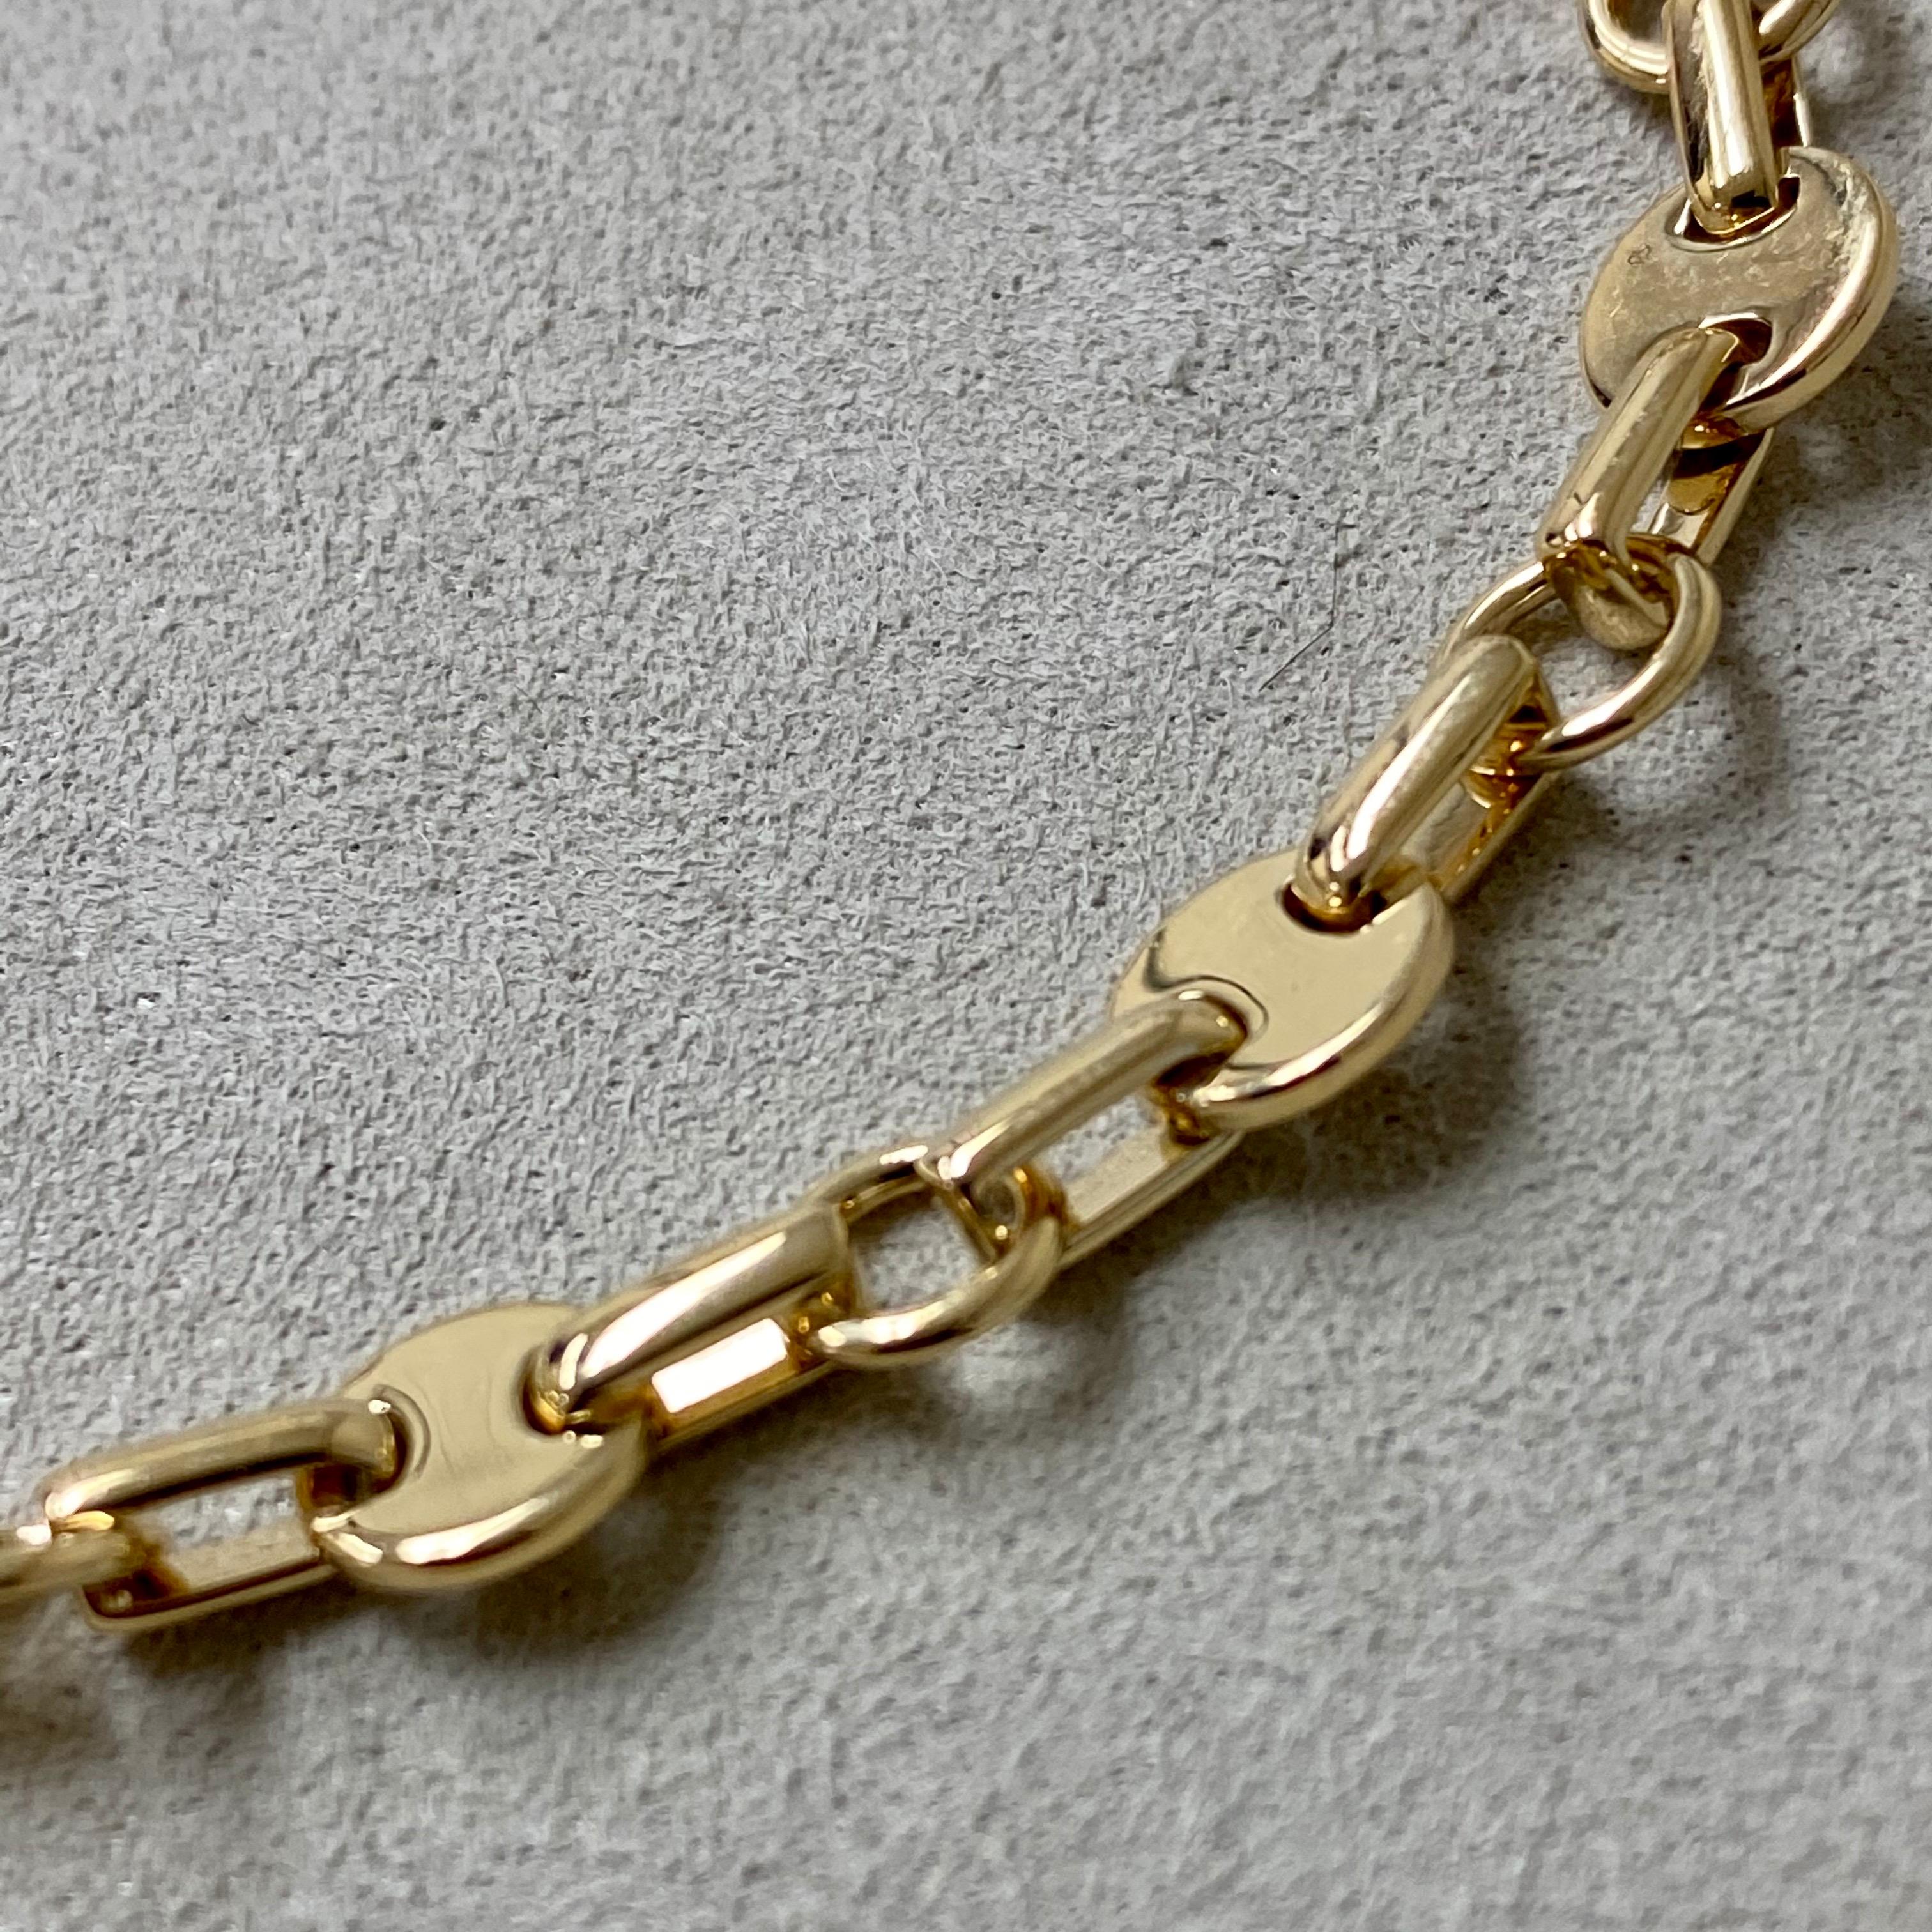 Created in 18 karat yellow gold

8.5 inch length with lobster clasp


About the Designers

Drawing inspiration from little things, Dharmesh & Namrata Kothari have created an extraordinary and refreshing collection of luxurious jewels. True believers